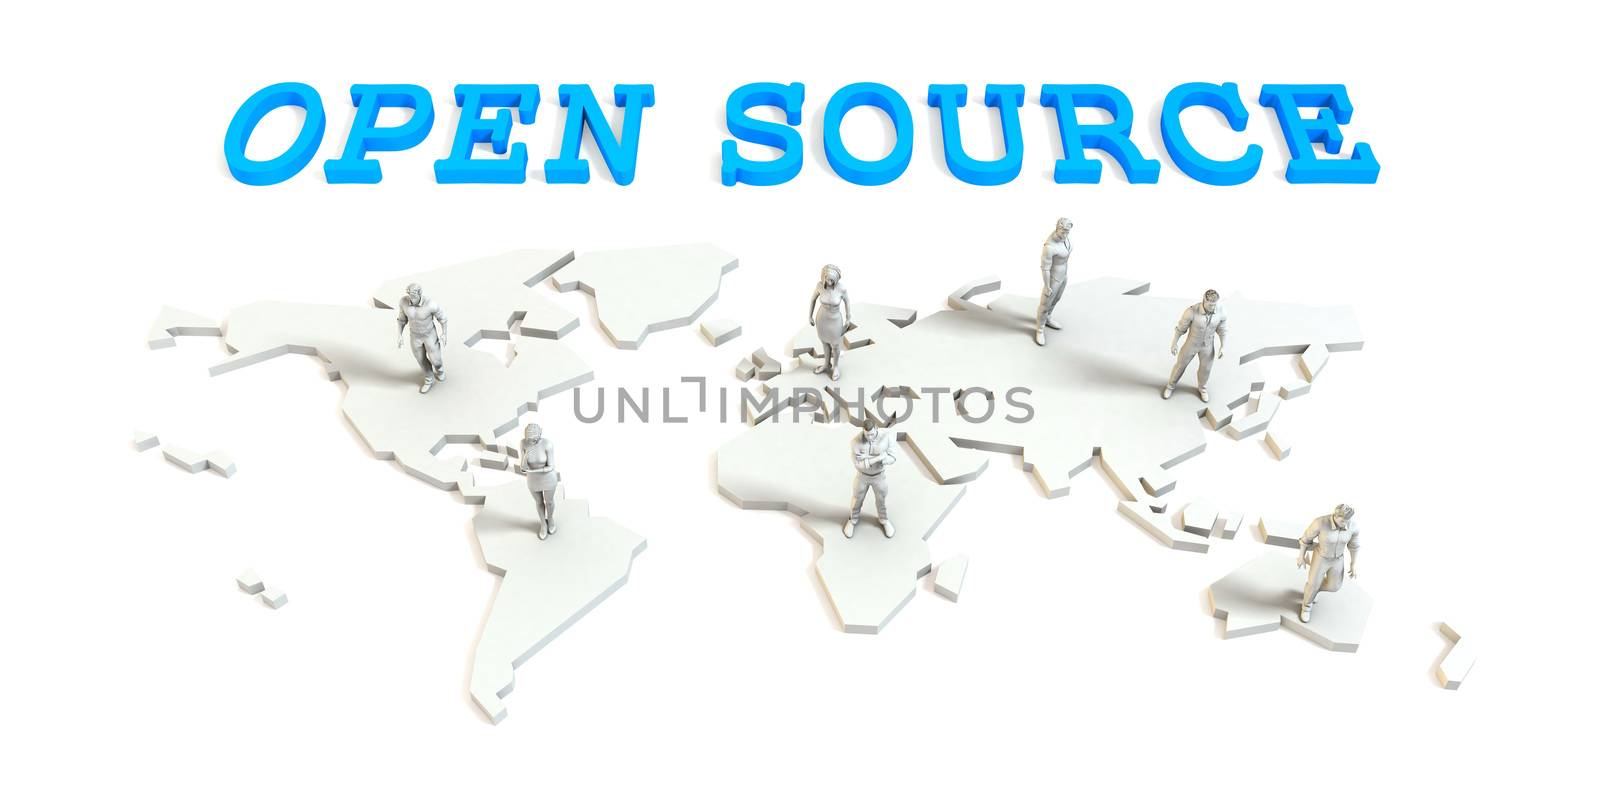 Open source Global Business Abstract with People Standing on Map